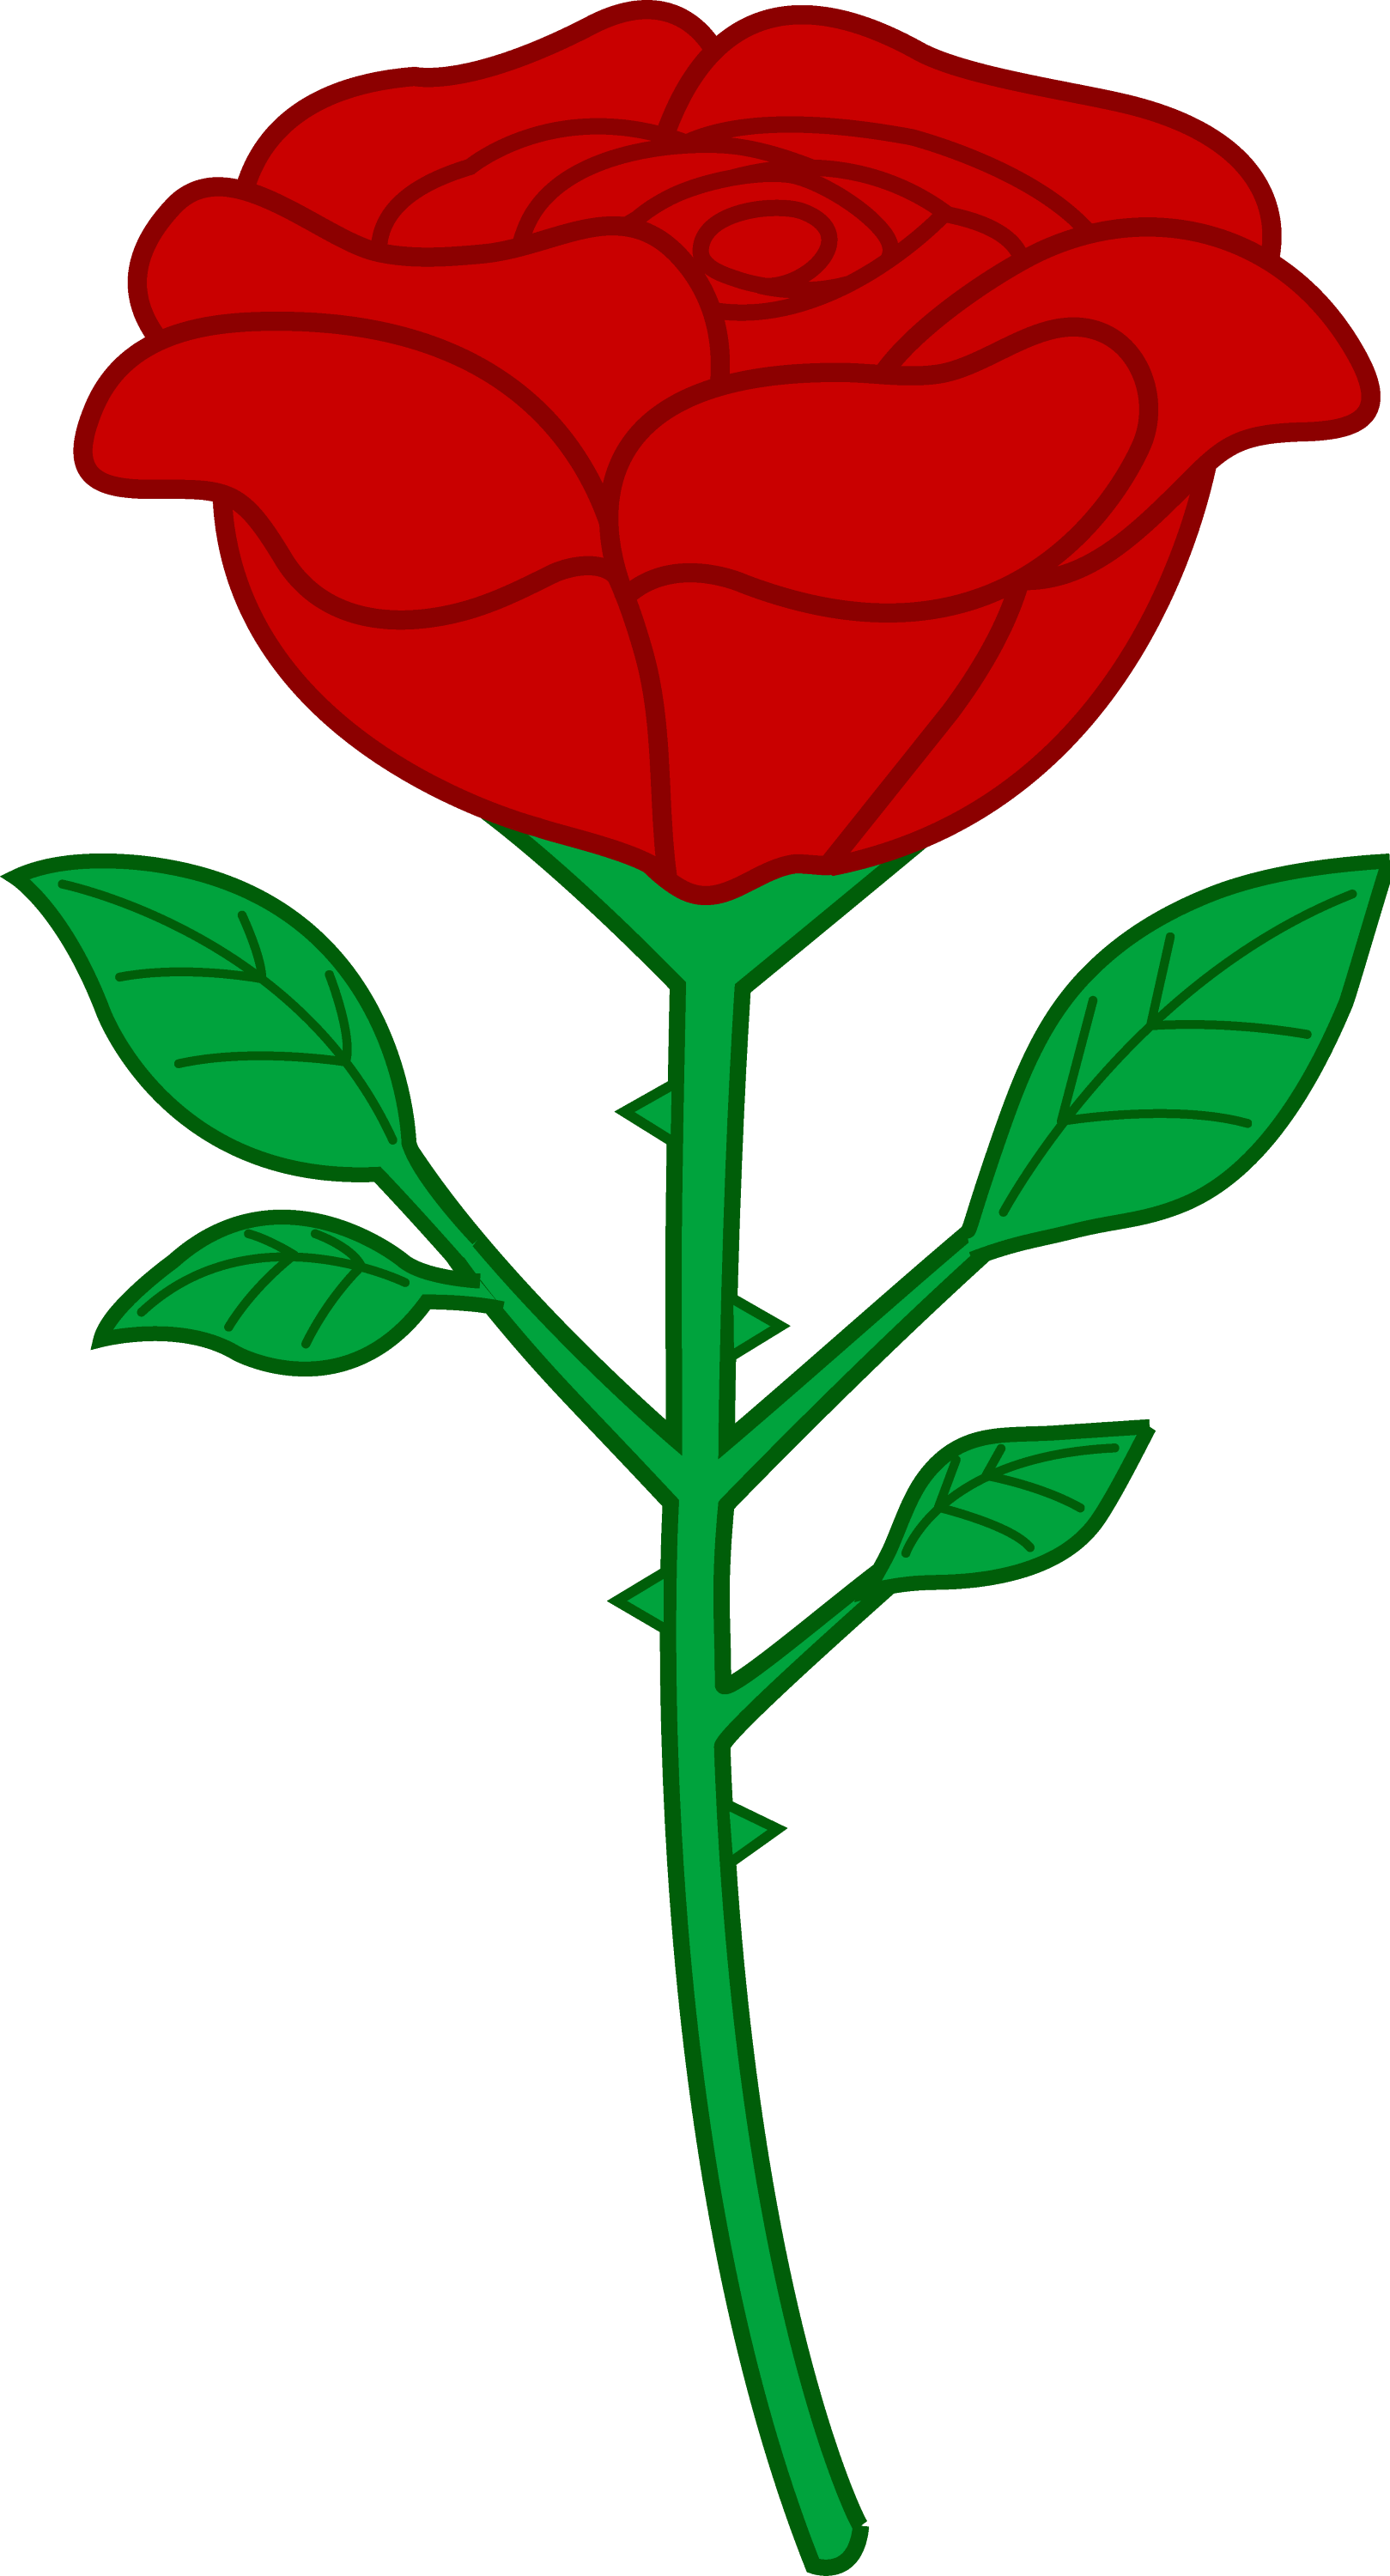 free clipart images roses - photo #49